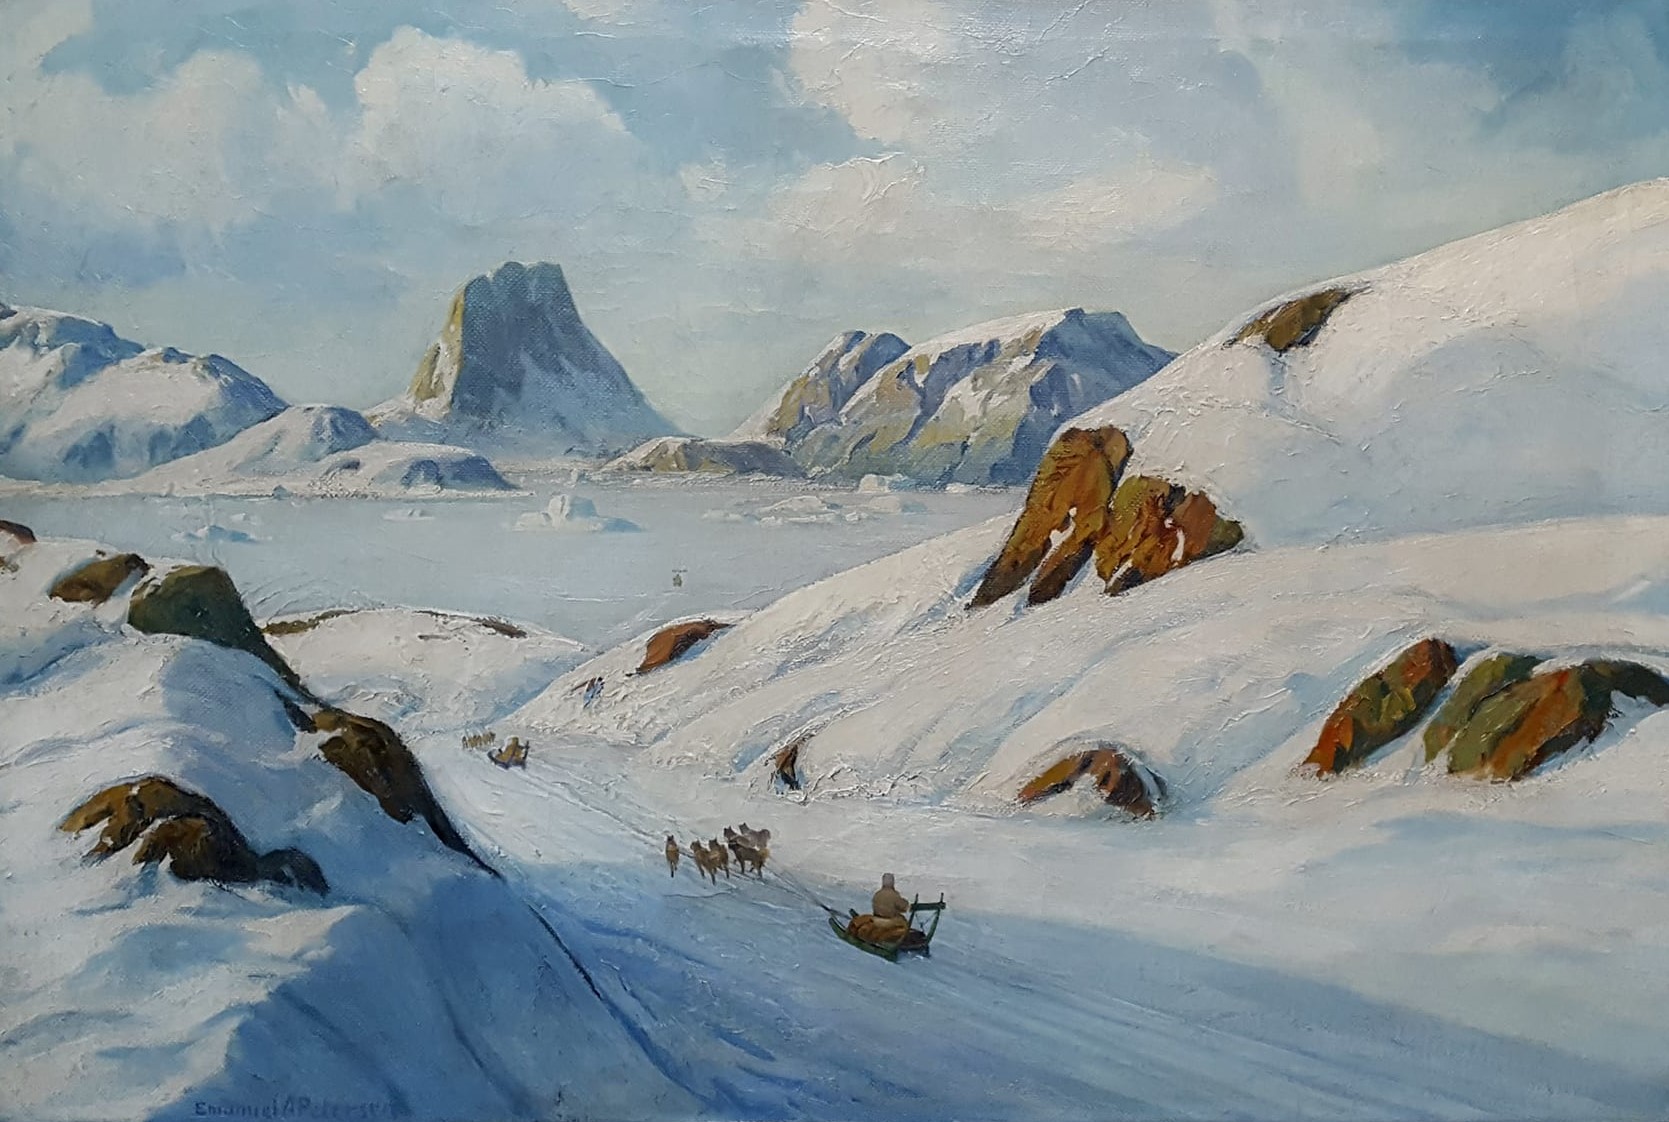 Emanuel A Petersen painting of Greenland